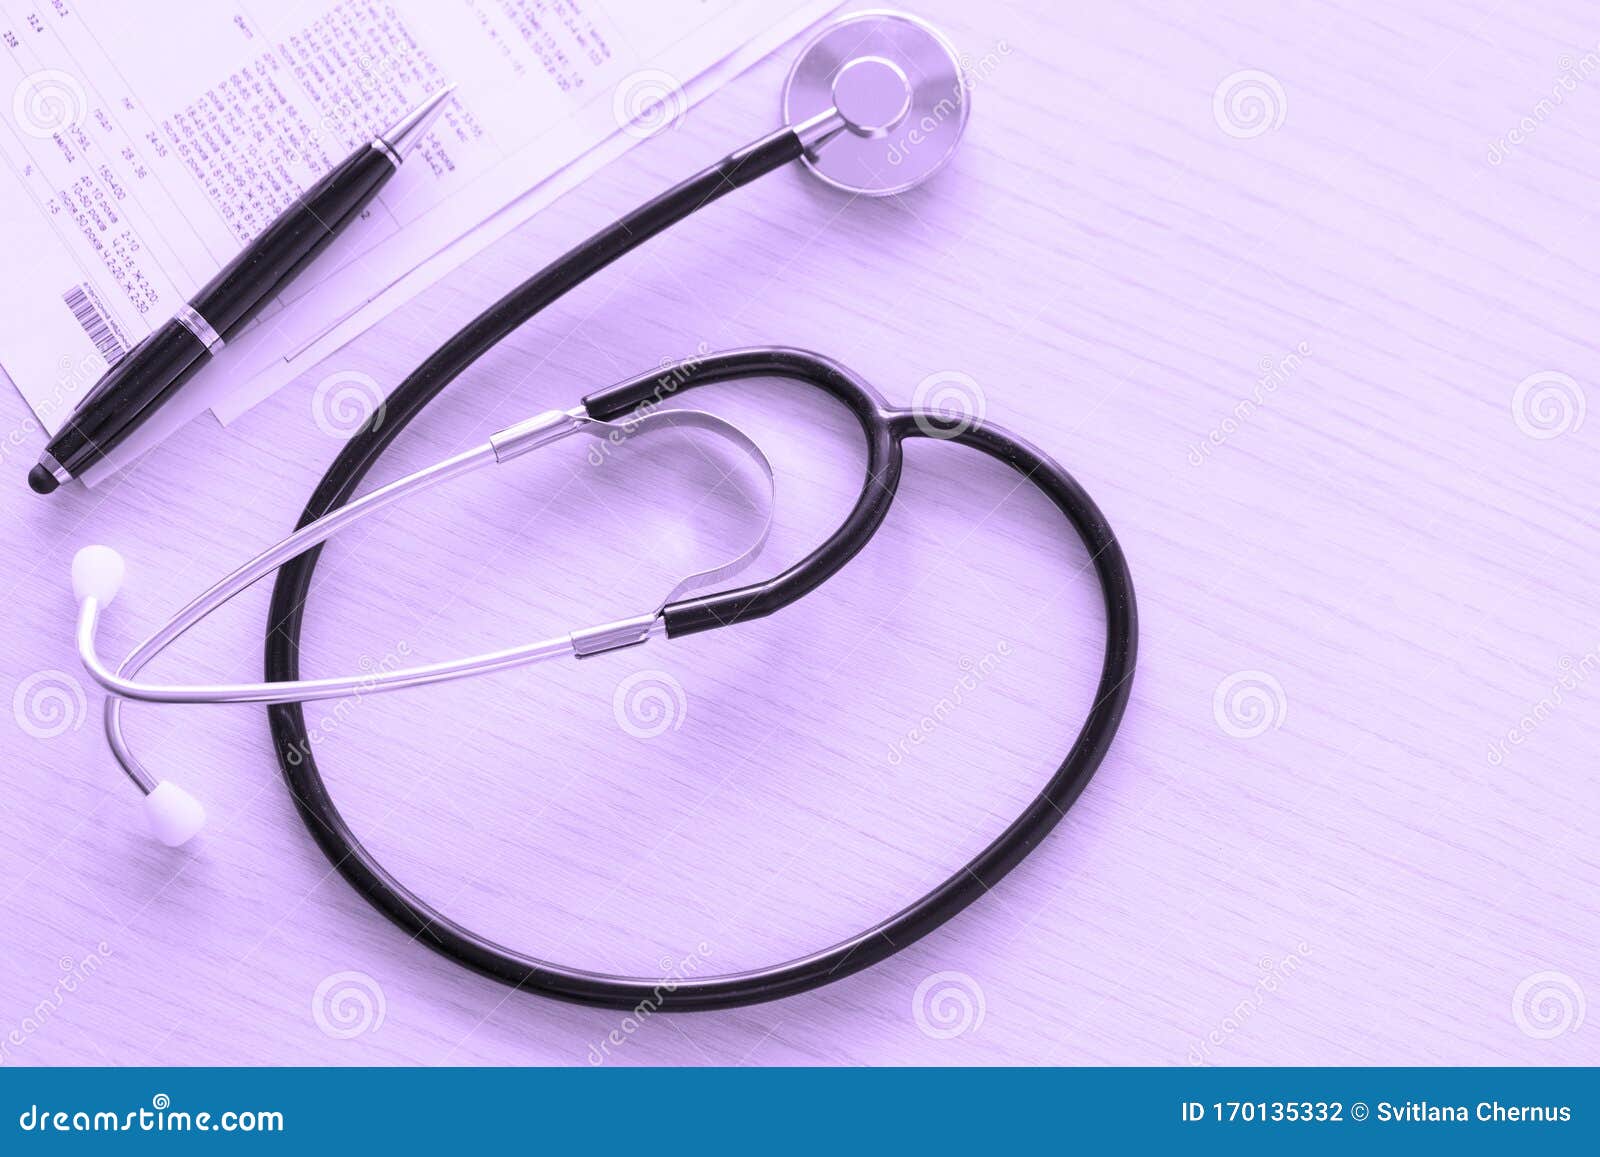 Stethoscope and Medical Documents on Doctor Table on Purple ...